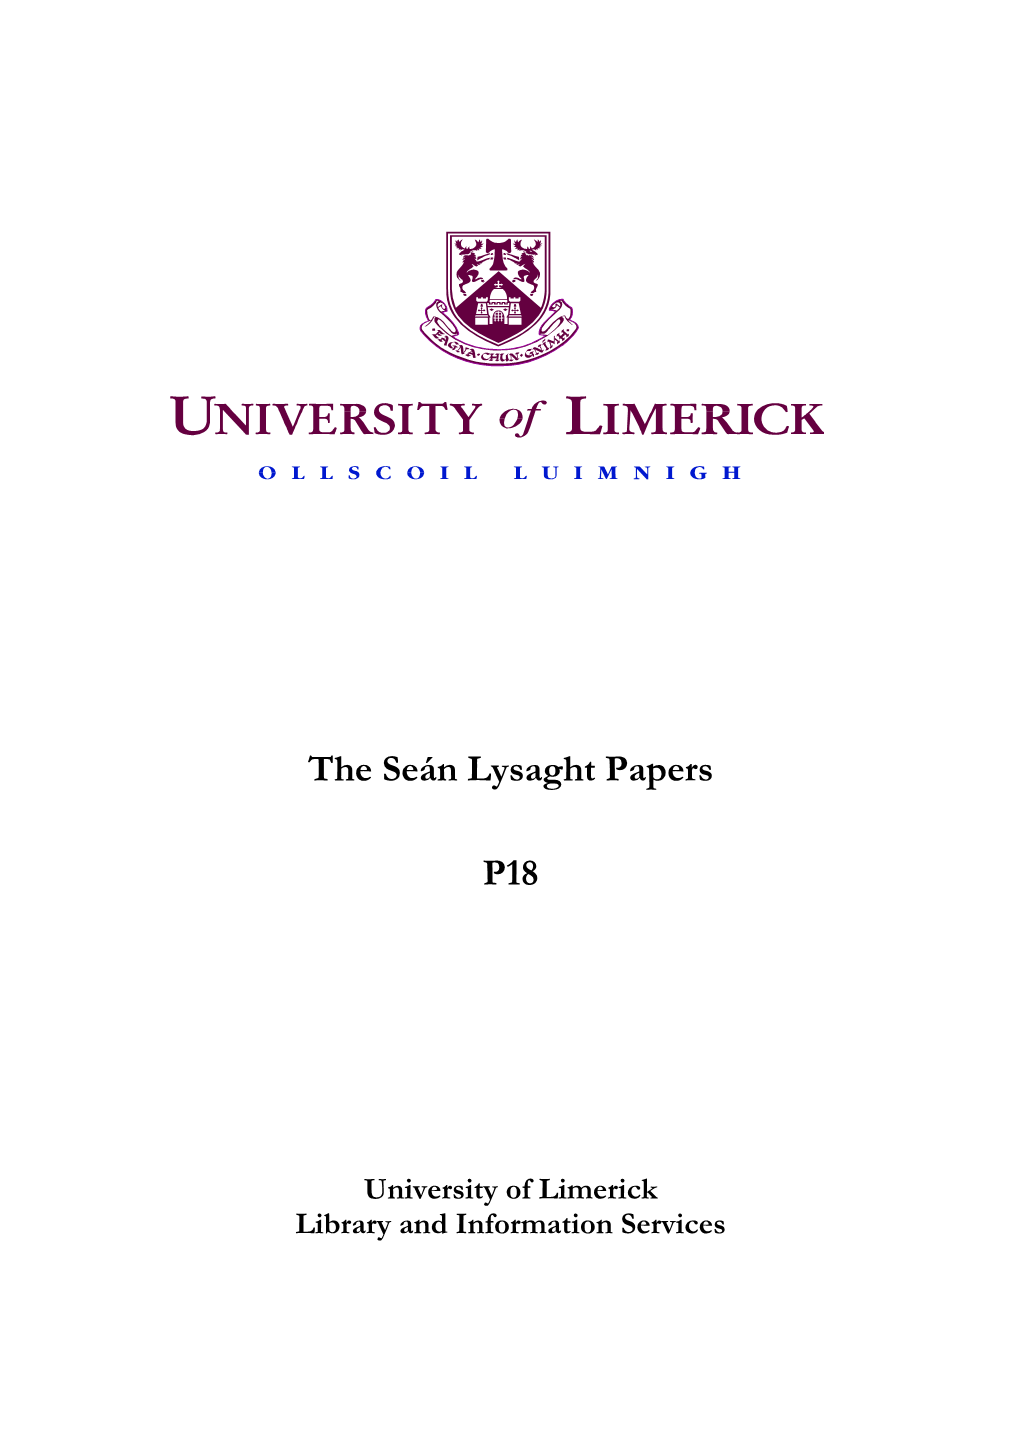 The Seán Lysaght Papers